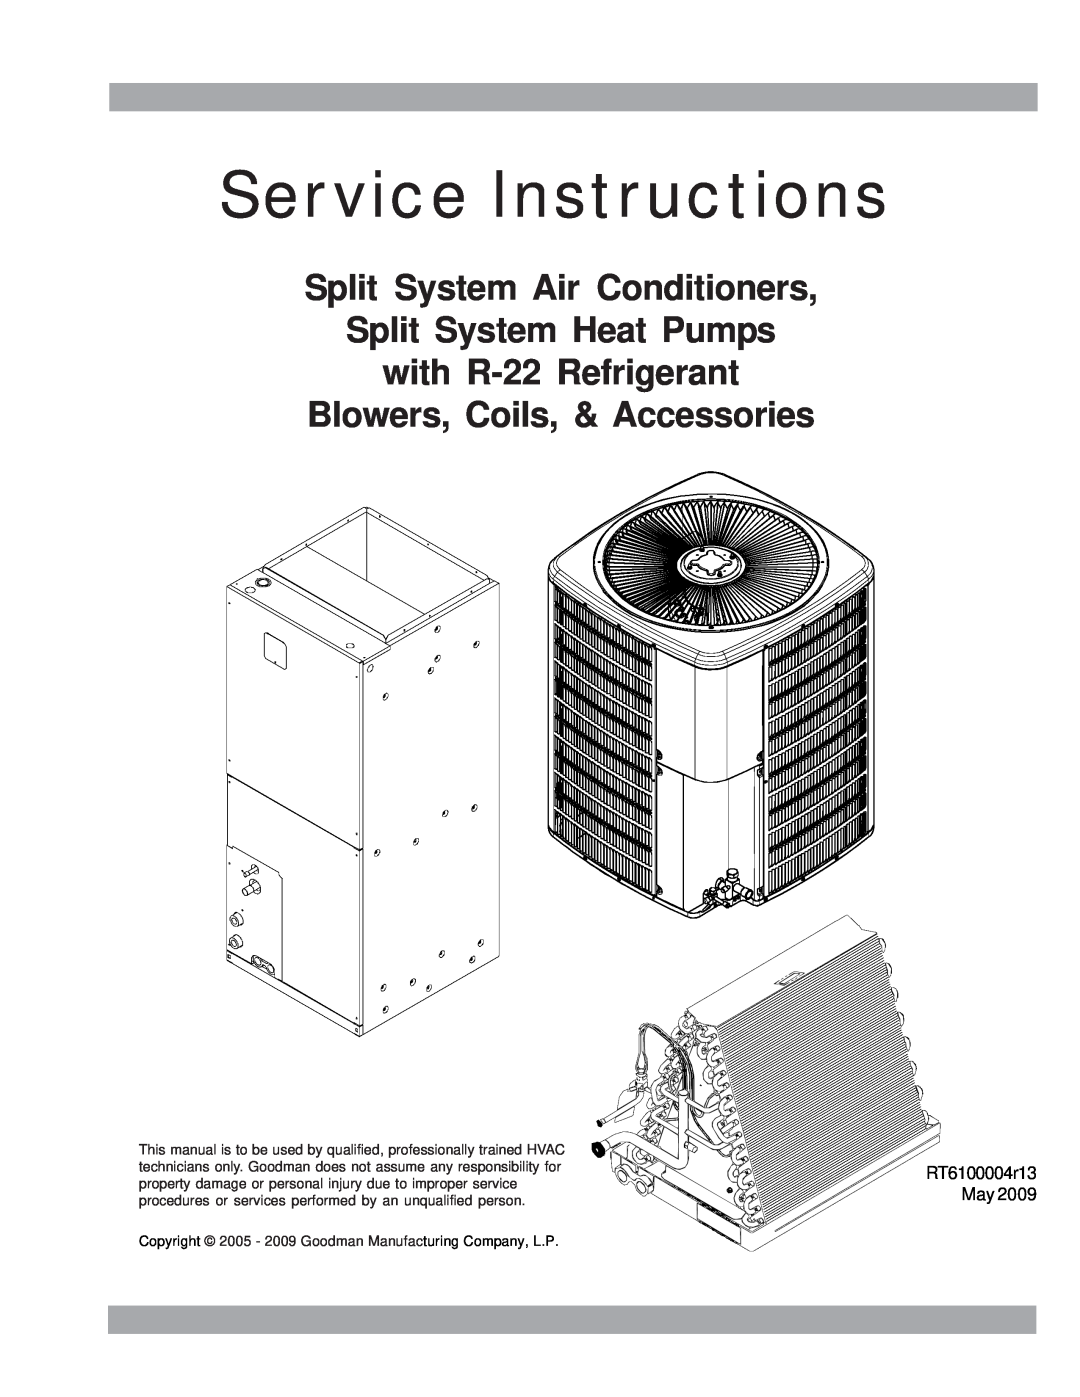 Goodman Mfg RT6100004R13 manual Service Instructions, Split System Air Conditioners, Blowers, Coils, & Accessories 